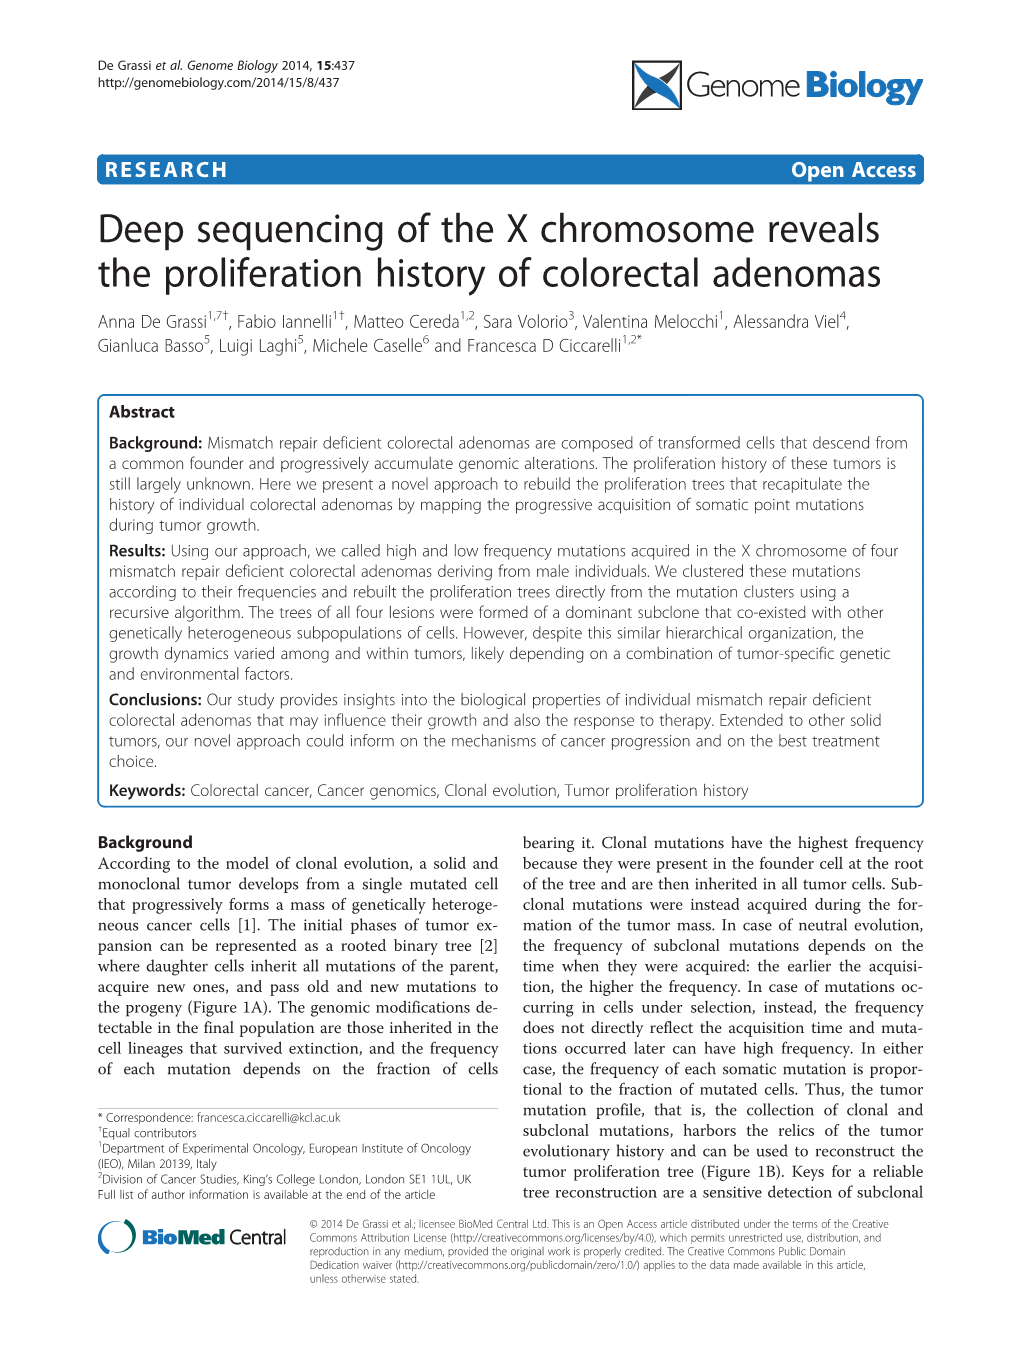 Deep Sequencing of the X Chromosome Reveals the Proliferation History of Colorectal Adenomas